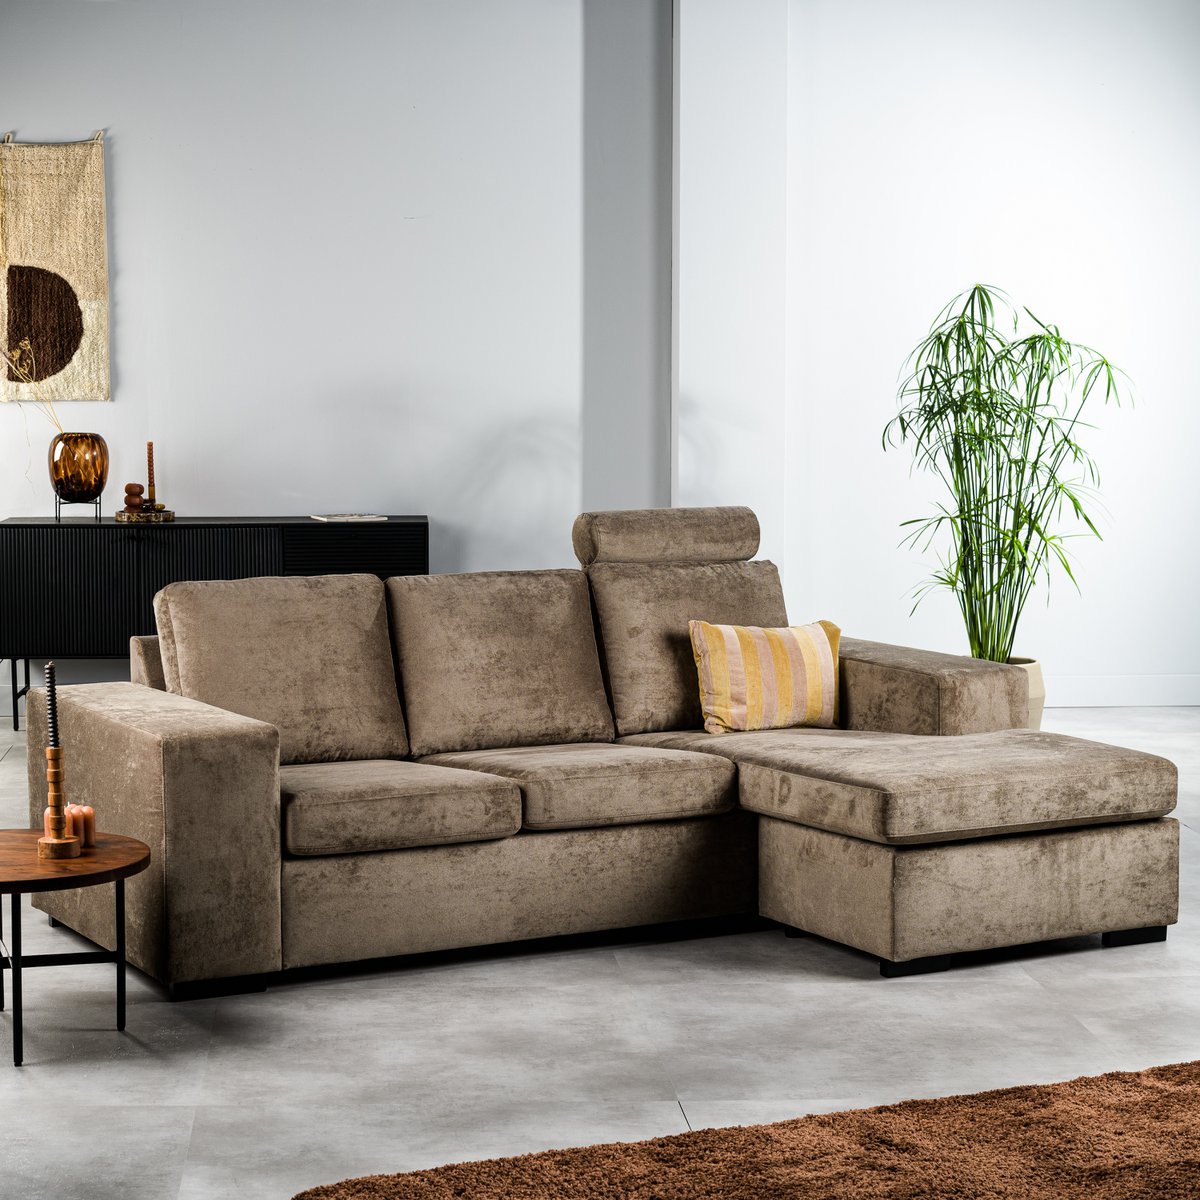 3 seater sofa CL L+R, with headrest, fabric Hotel Chique, H430 brown